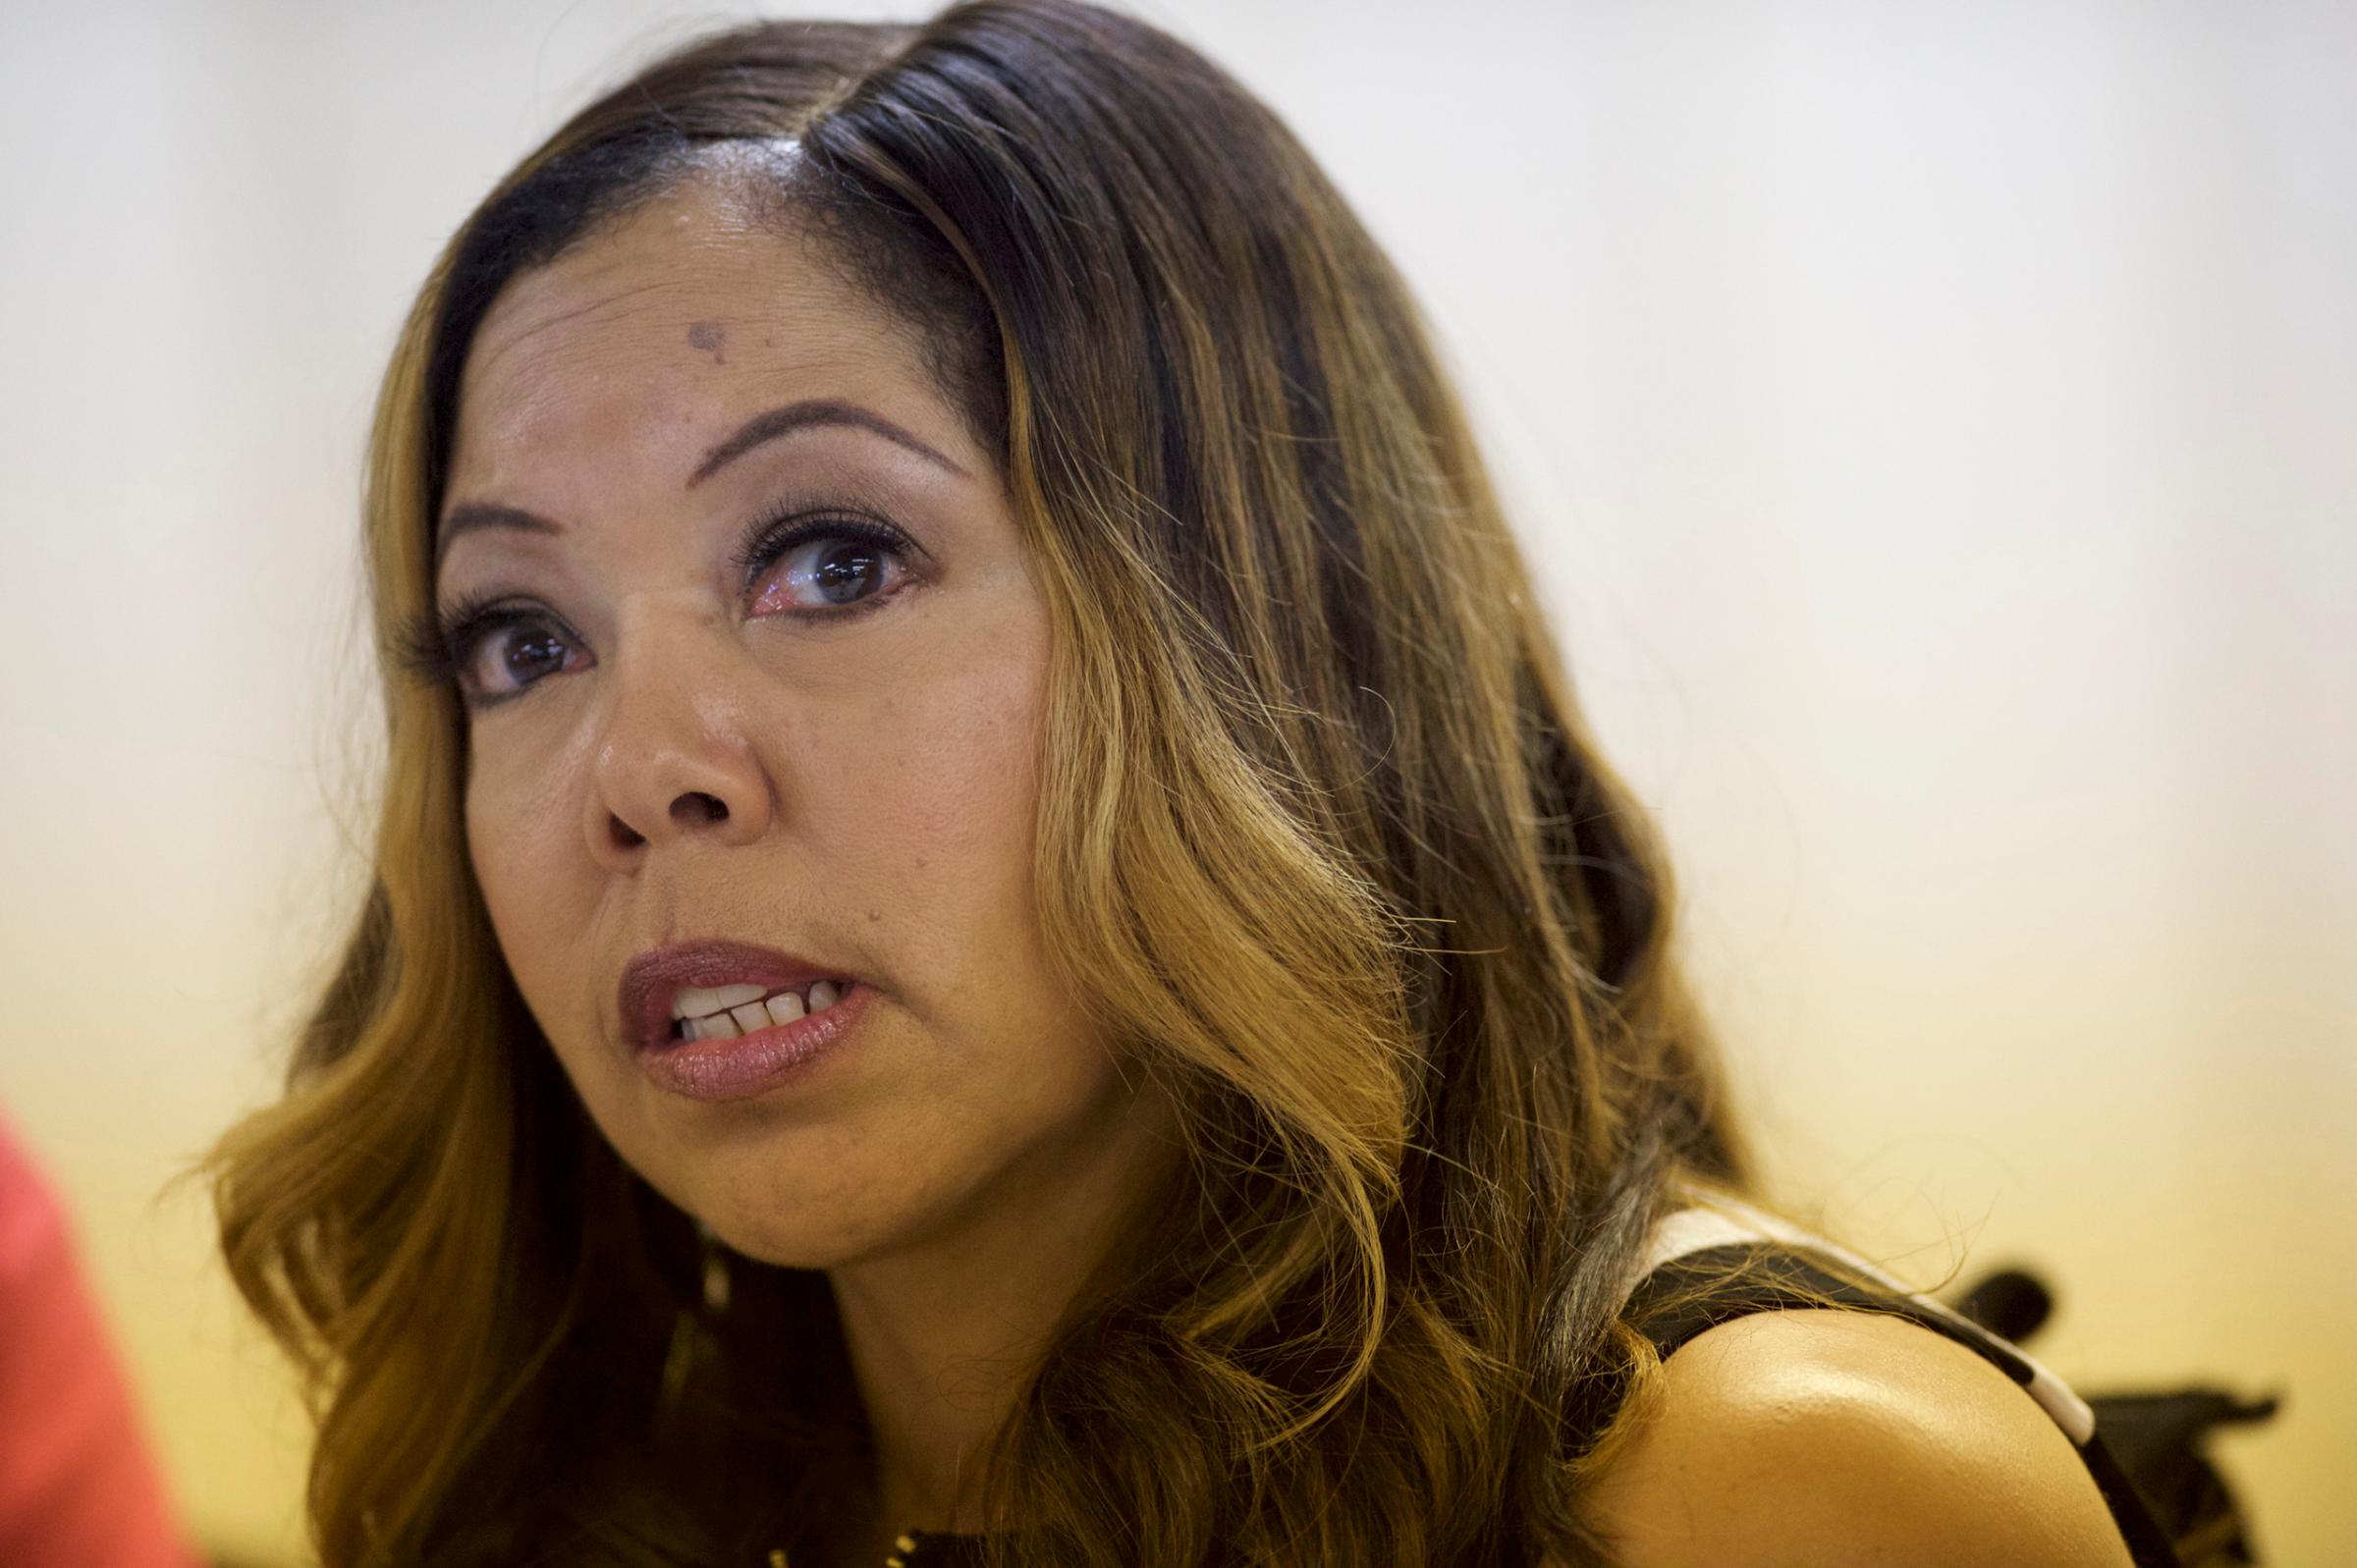 Lucy McBath, mother of Jordan Davis, who was killed by a man who claimed self-defense but was later found guilty of murder, speaks during a Hillary Clinton for South Carolina "Breaking Down Barriers" forum on Feb. 22, 2016.